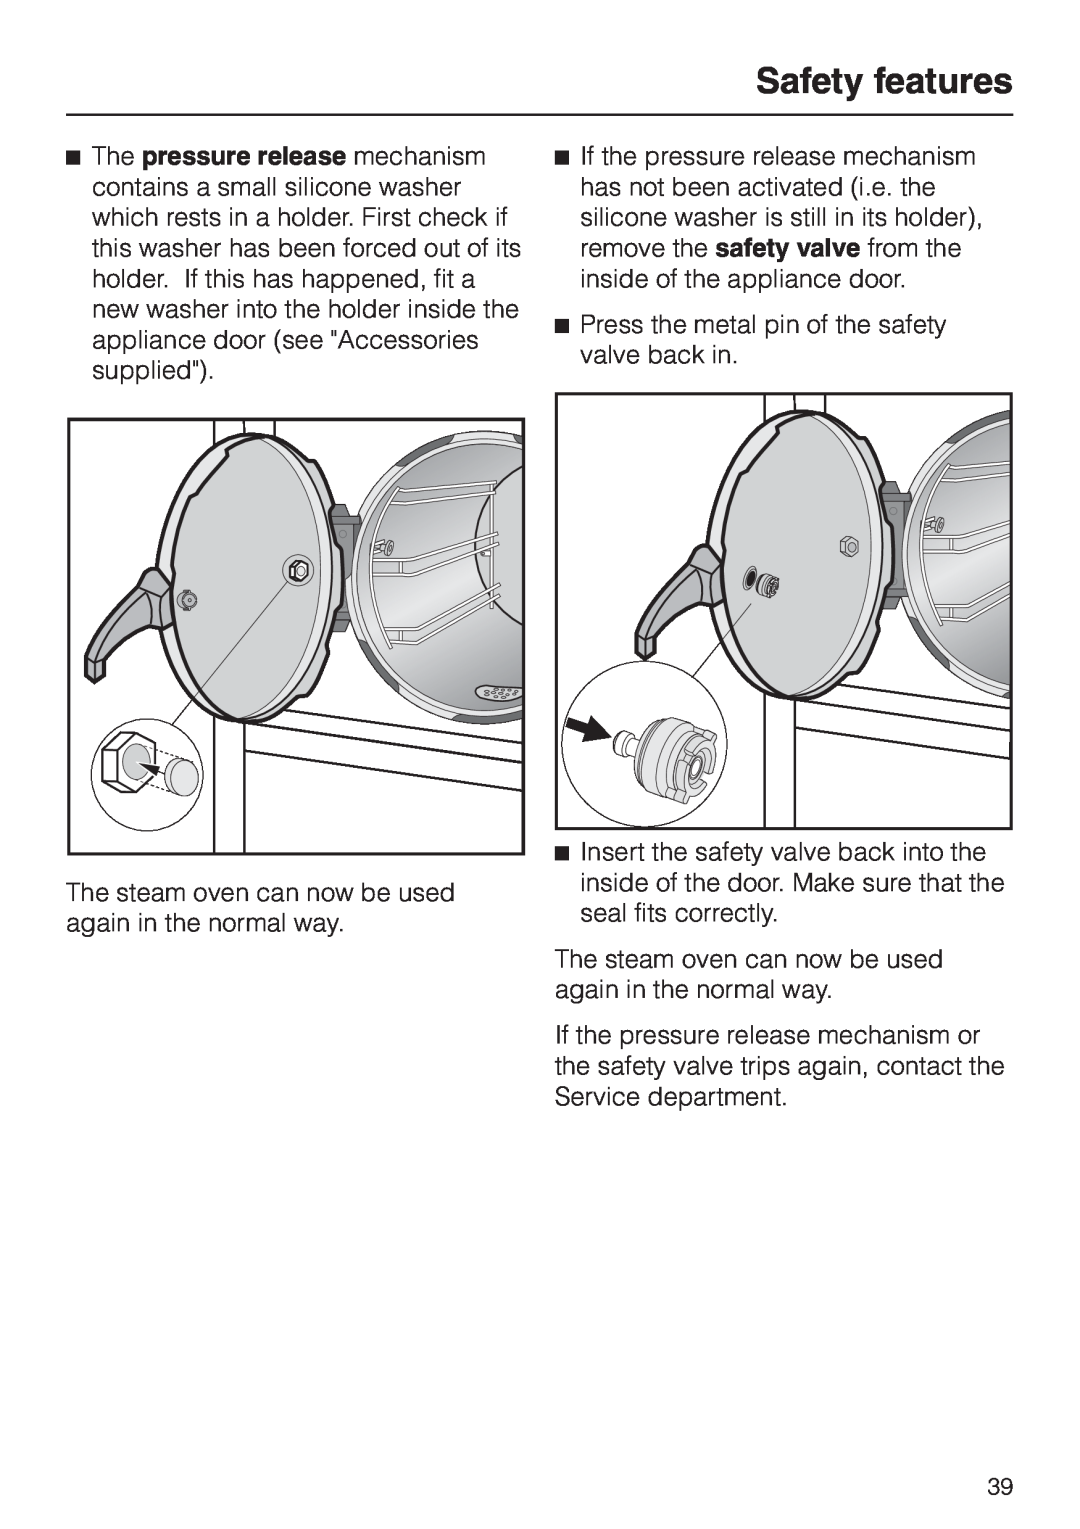 Miele DG 4064 L manual Safety features, Press the metal pin of the safety valve back in 